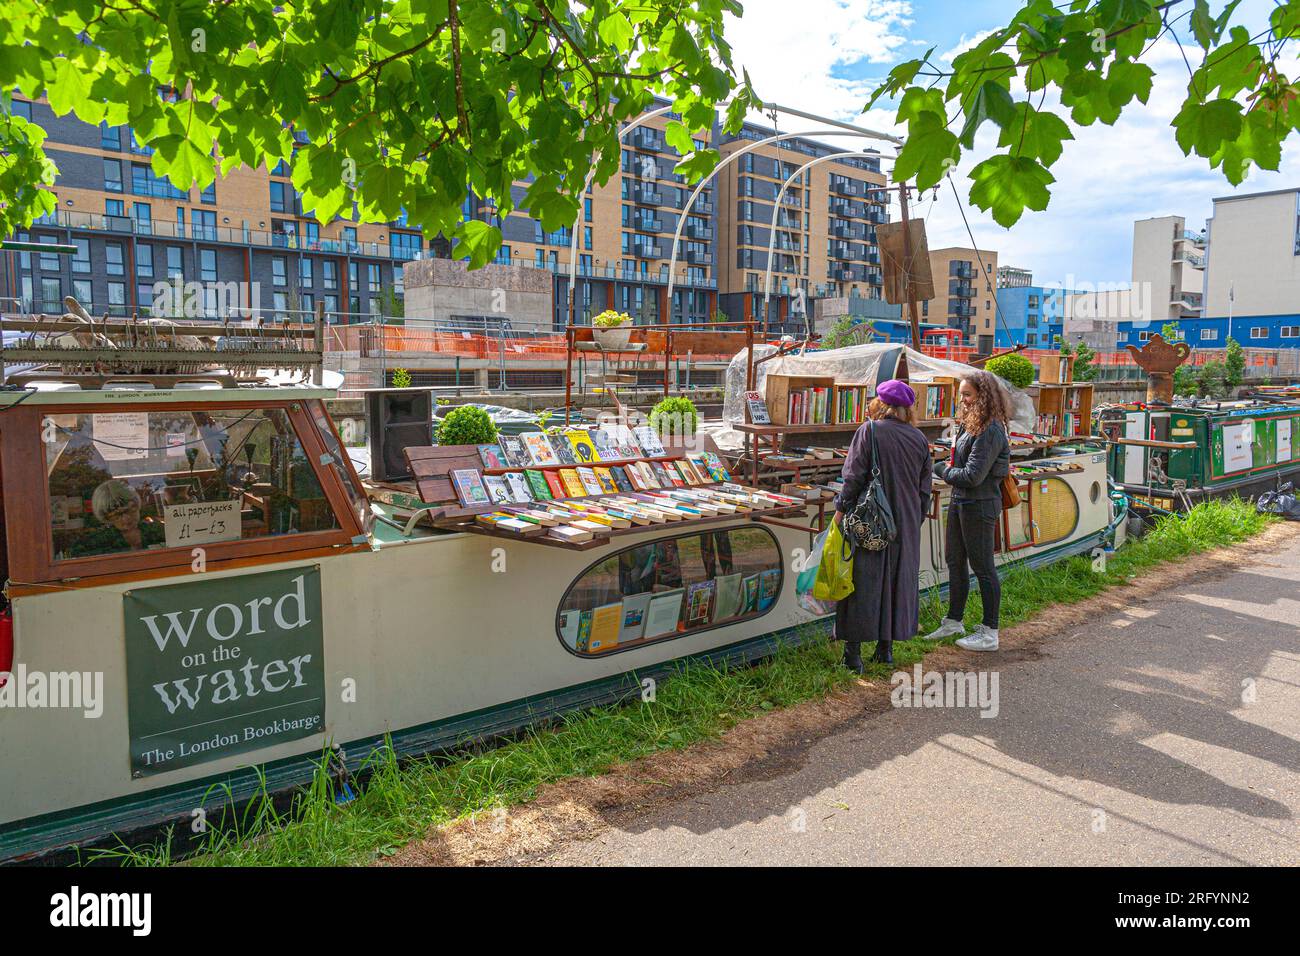 Word on the Water’s Canalboat Bookstore de Londres . Banque D'Images